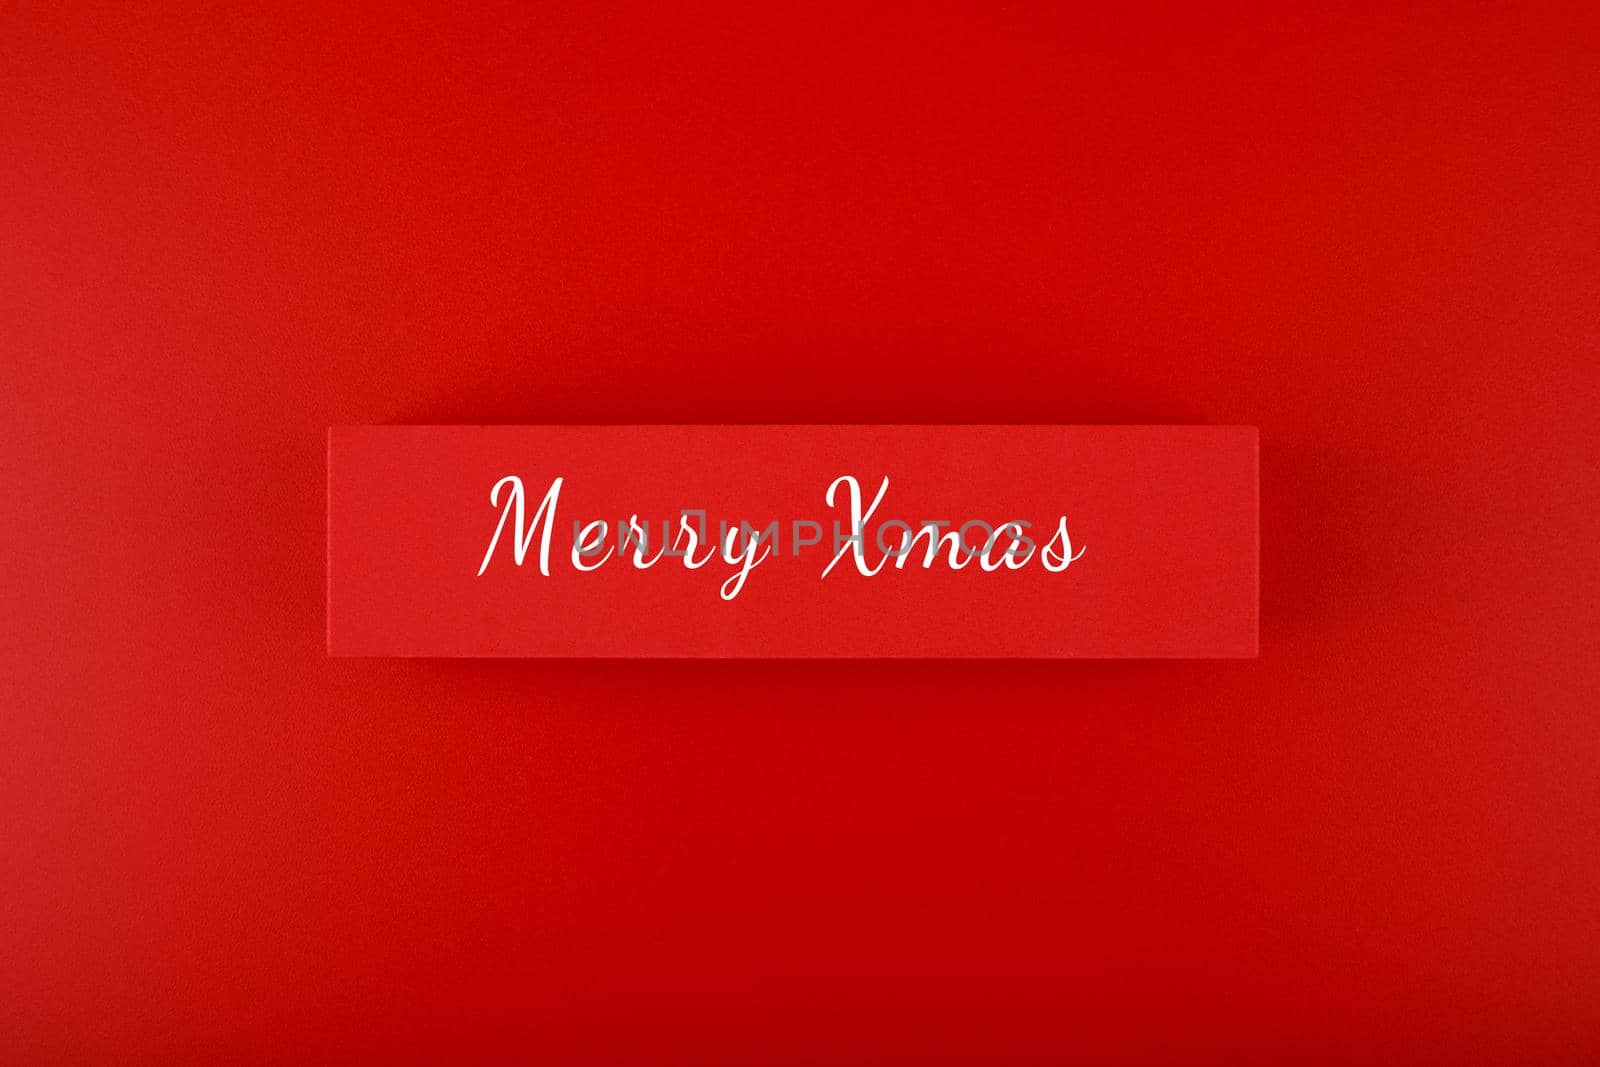 Minimal elegant flat lay Christmas theme. Merry Christmas text hand written on red tablet on red background. Creative layout in red colors